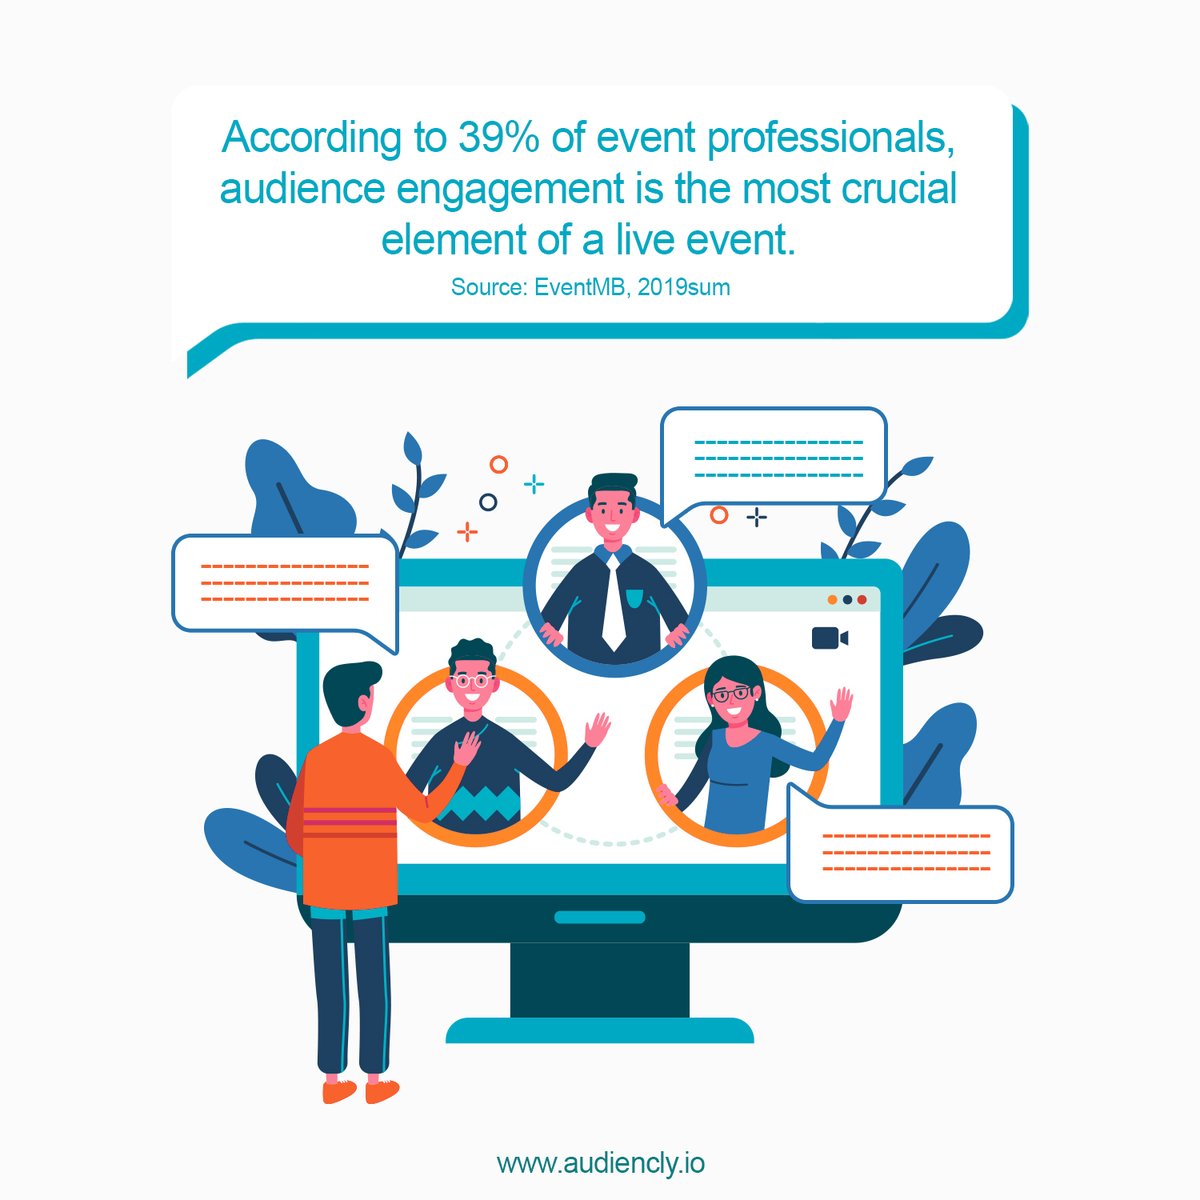 Ways to retain #audienceengagement


- Have short and #informativesessions

- Captivate with stories

- Conduct #livepolls & surveys

- Use high quality visuals and videos



Be sure to tell us what worked in your next #bigpresentation!

#audiencematters #audiencly